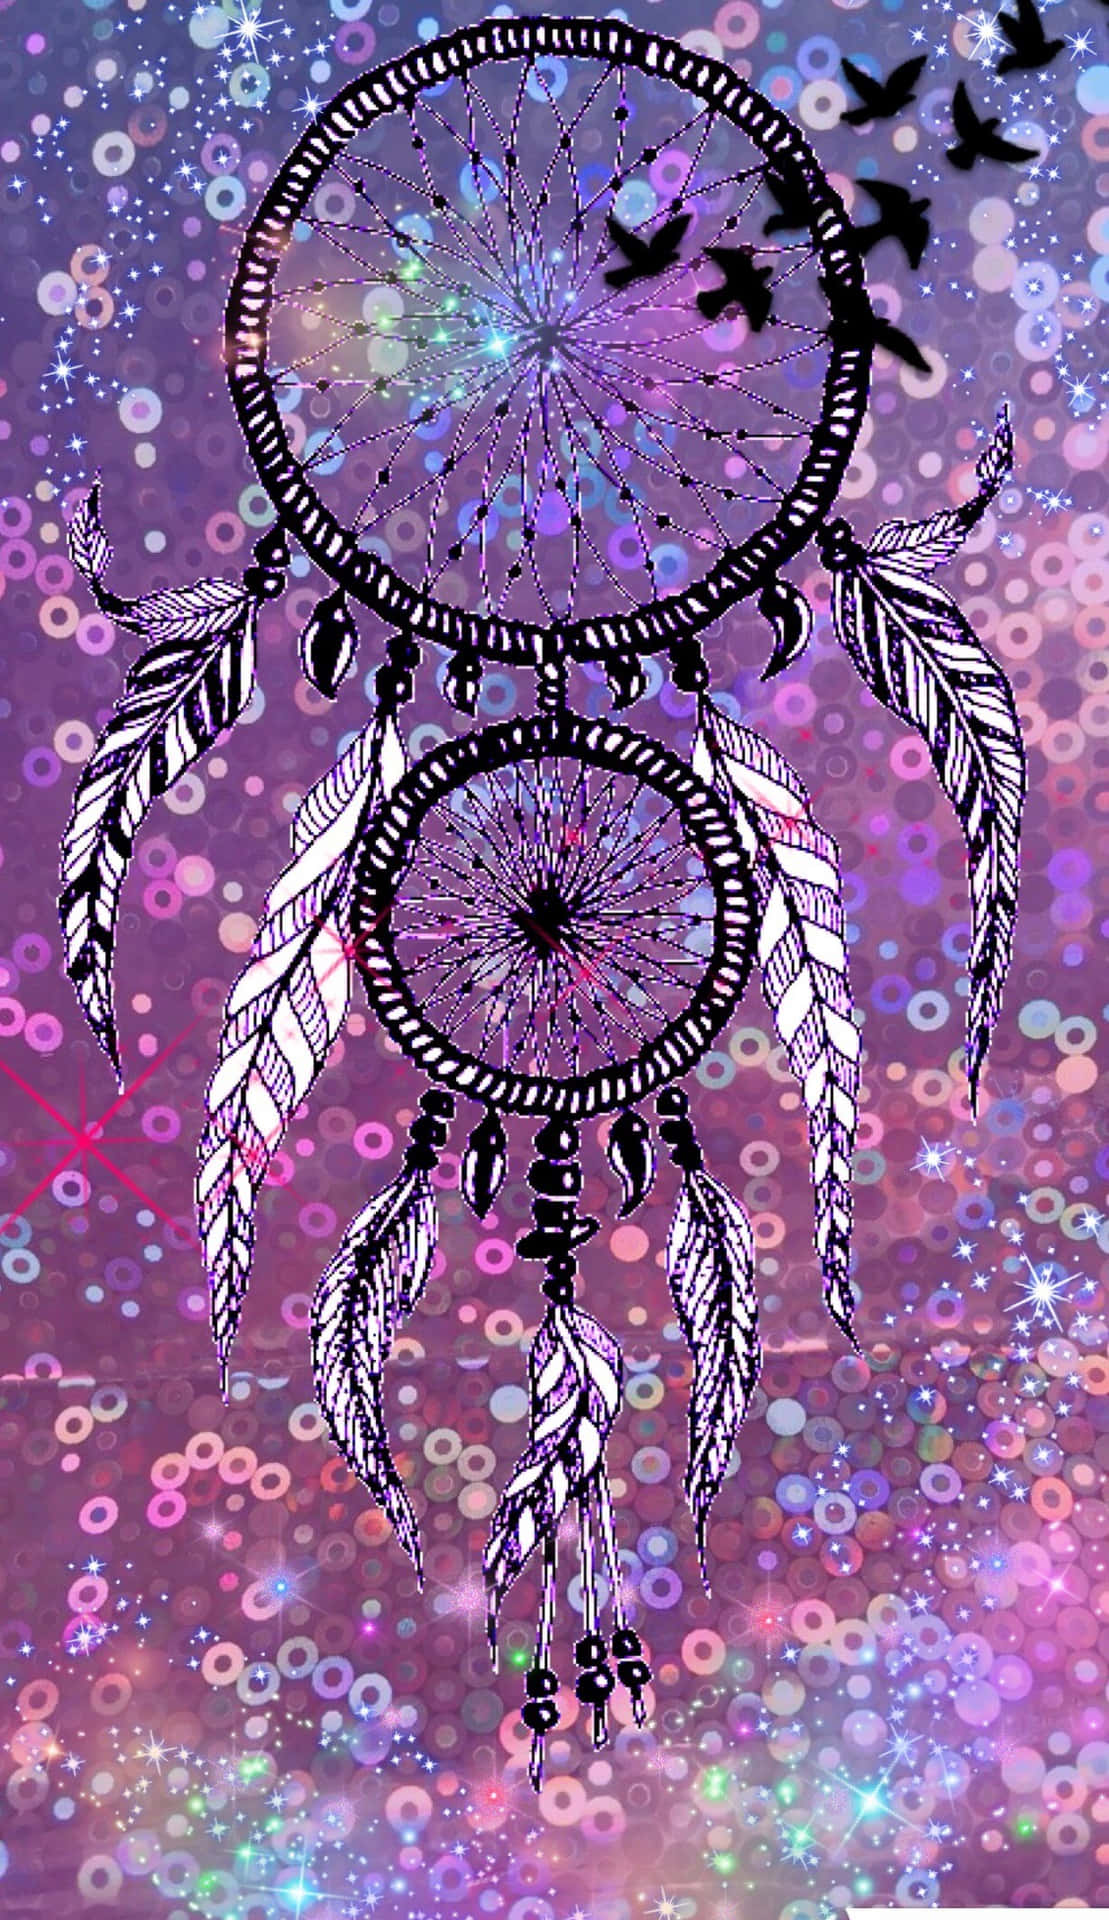 Dream Catcher Live Wallpaper for Vibrantlooking Phone  free download